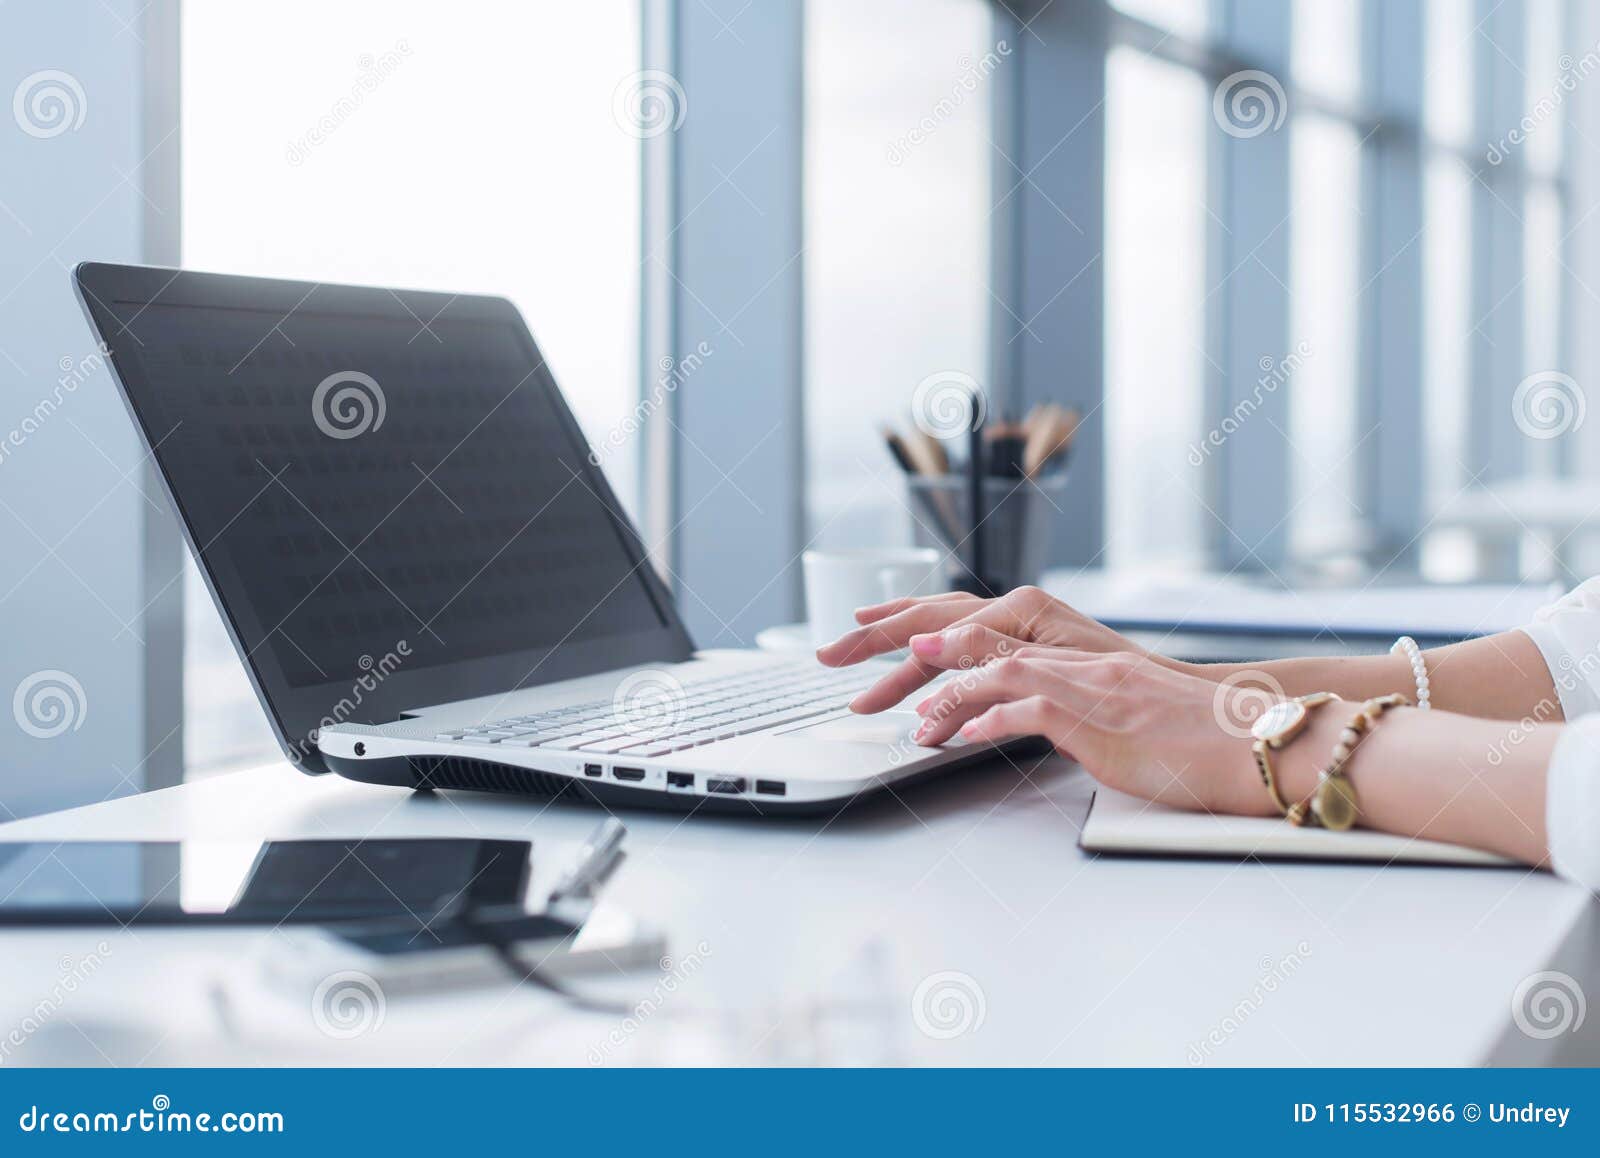 female worker using laptop in office, working with new project. woman blogging at home as a freelancer.